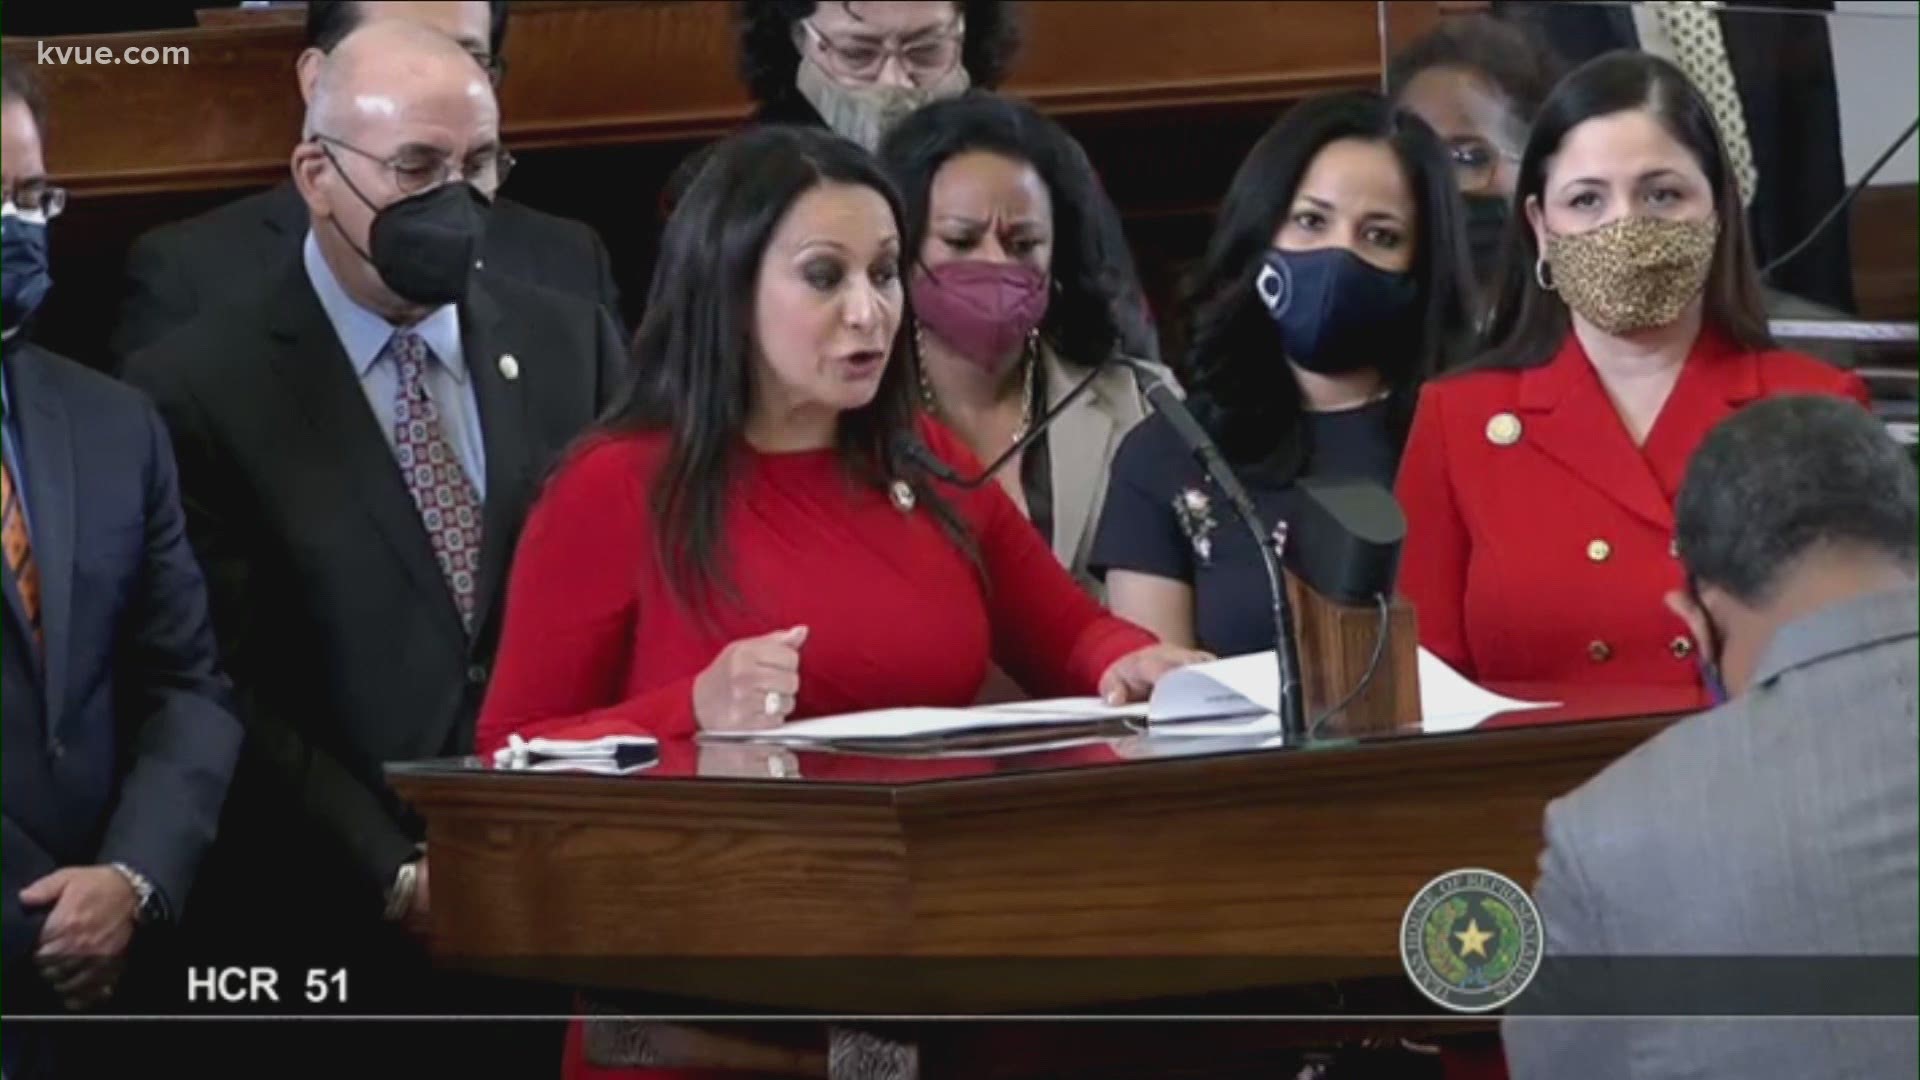 KVUE's Ashley Goudeau gives us a rundown on updates from the Texas Legislature on Wednesday.